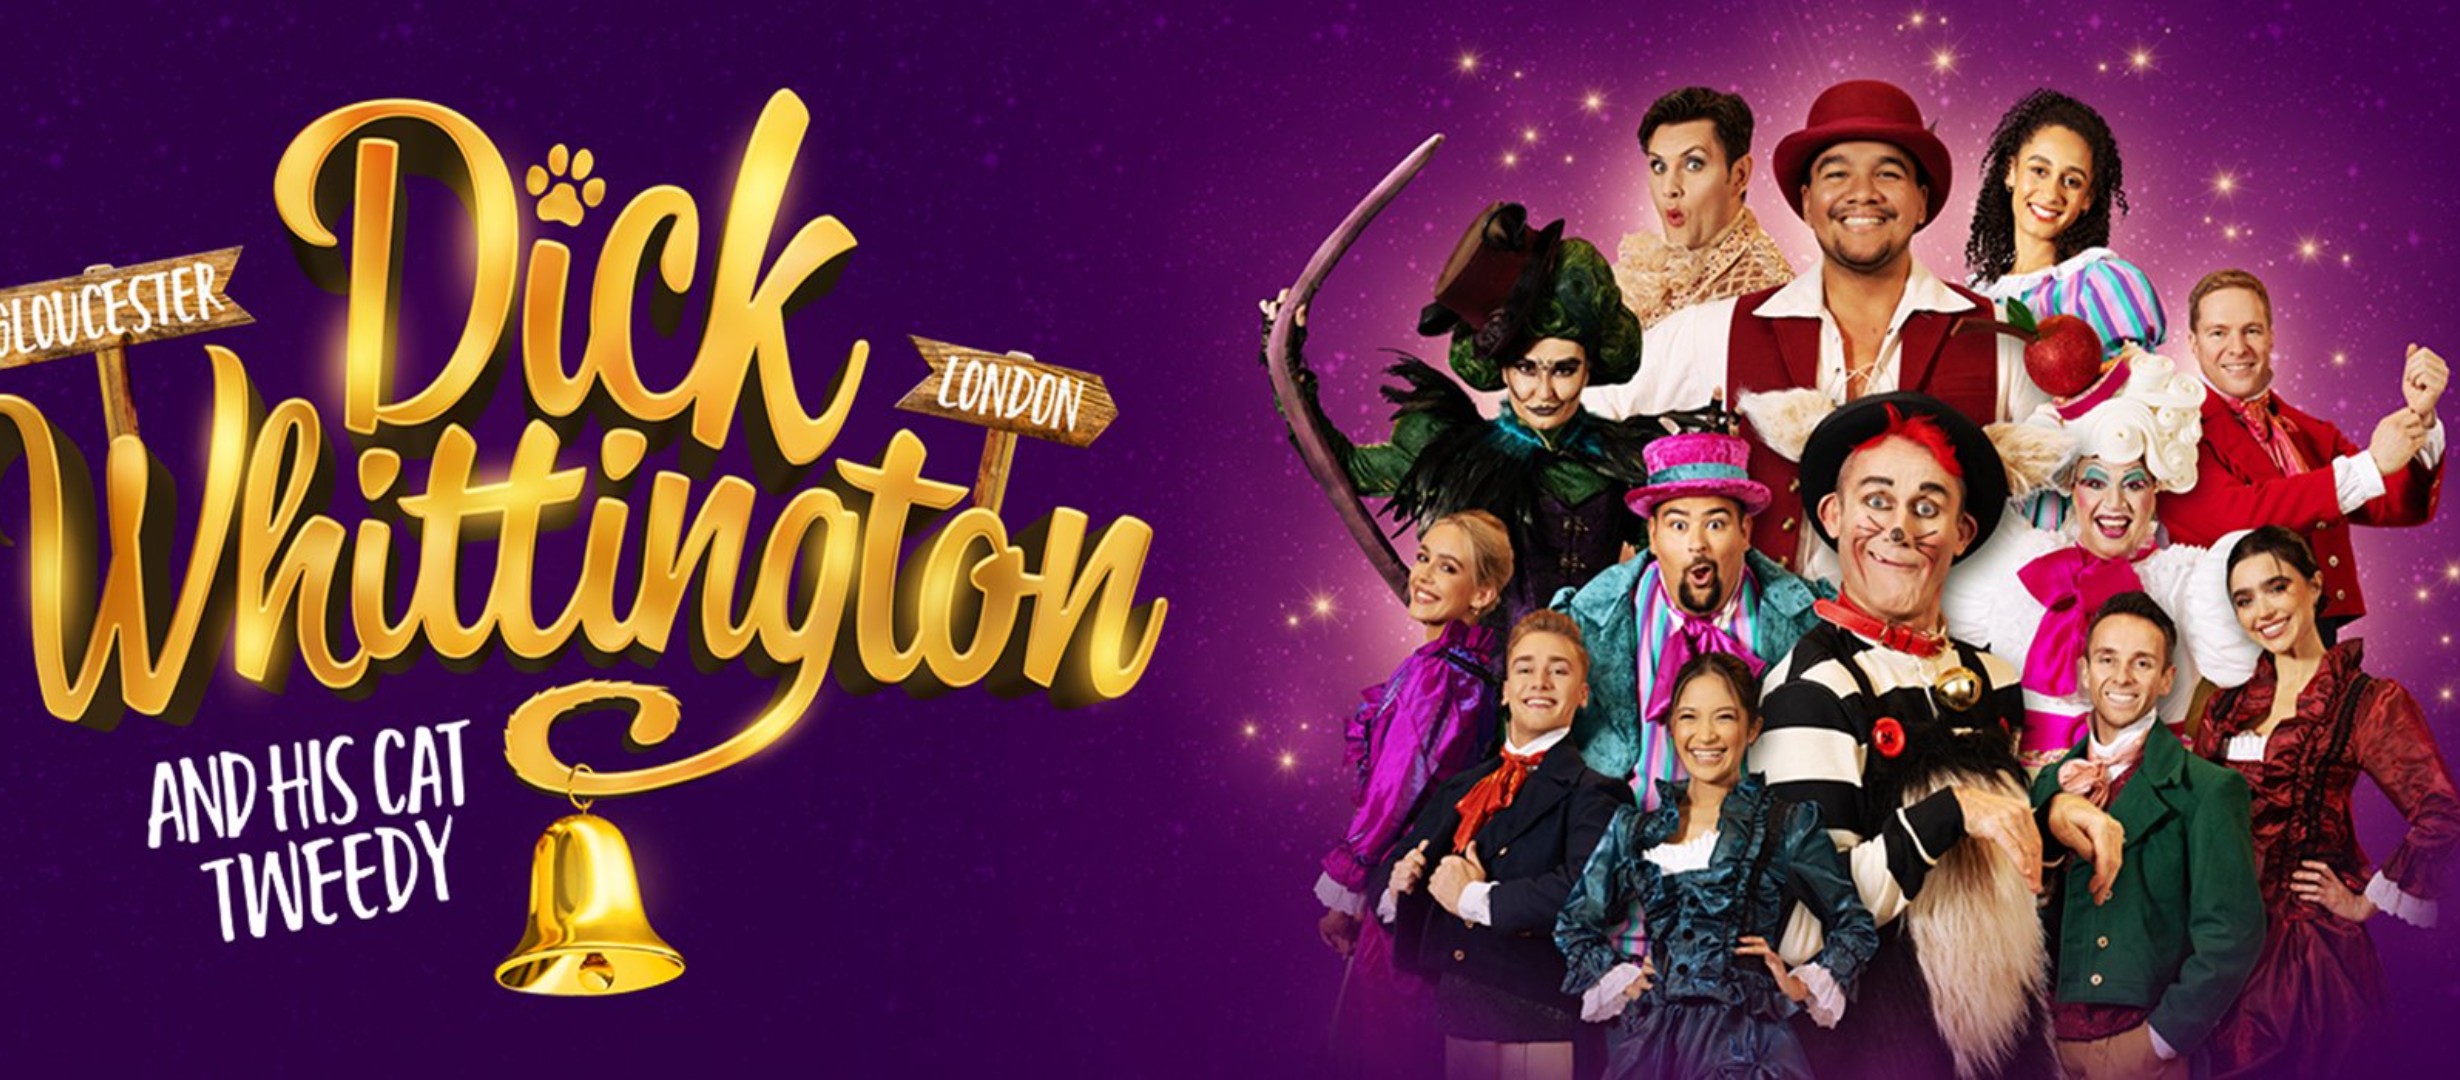 image of whole cast, text reads 'Dick whittington and his cat Tweedy' with road signs for Gloucester and London